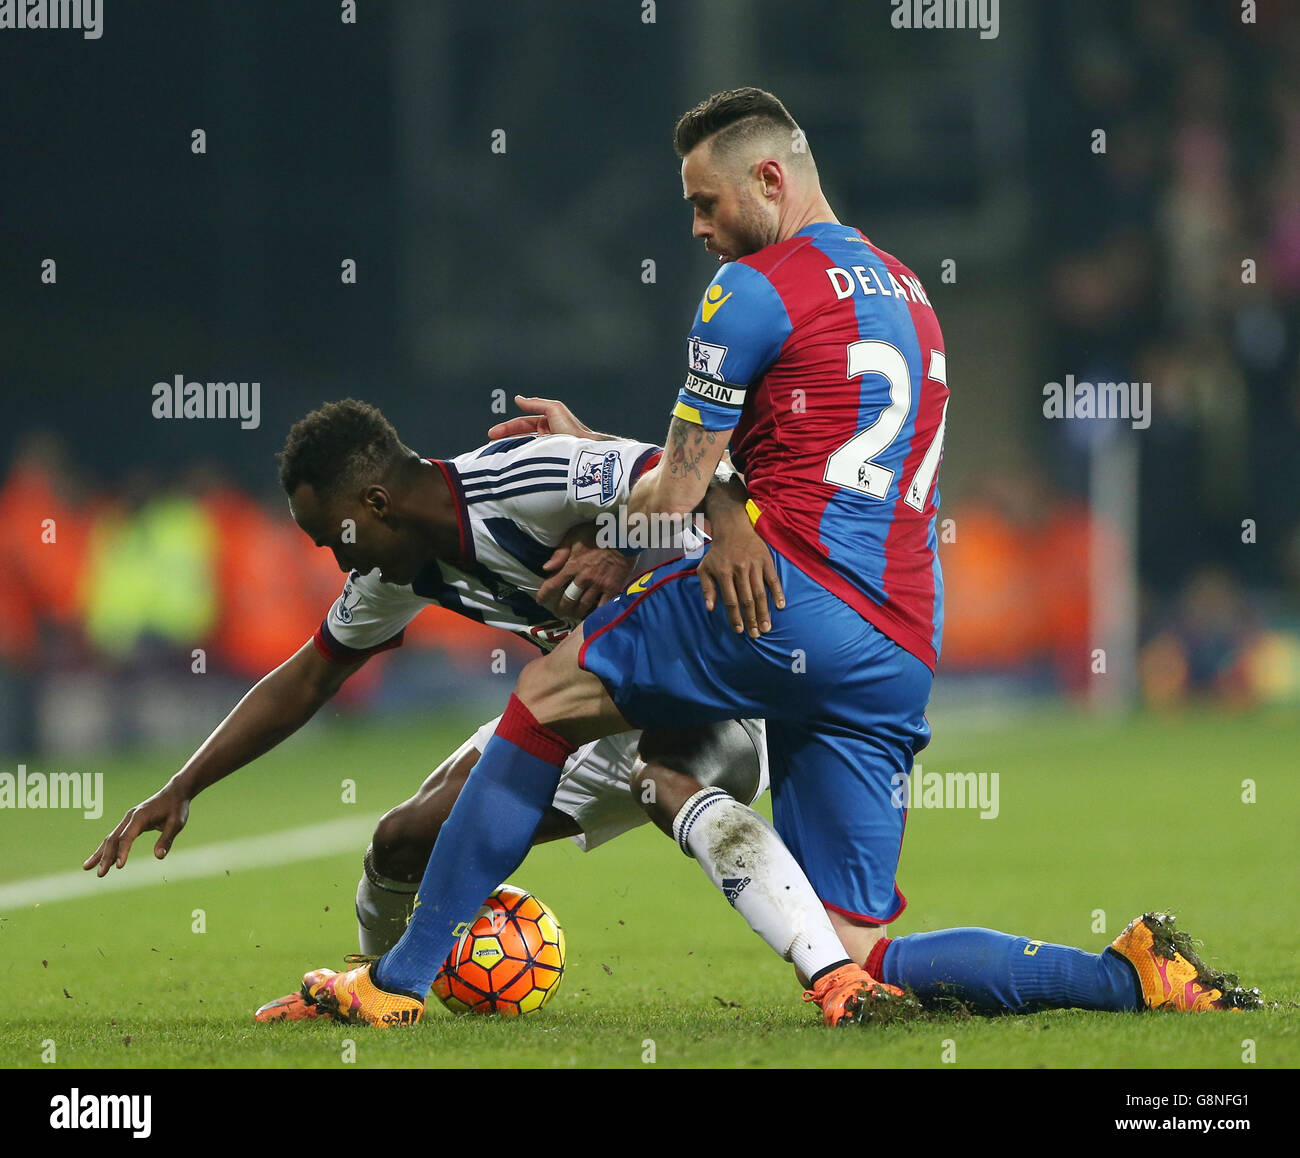 West Bromwich Albion's Saido Berahino (left) and Crystal Palace's Damien Delaney battle for the ball during the Barclays Premier League match at The Hawthorns, West Bromwich. Stock Photo